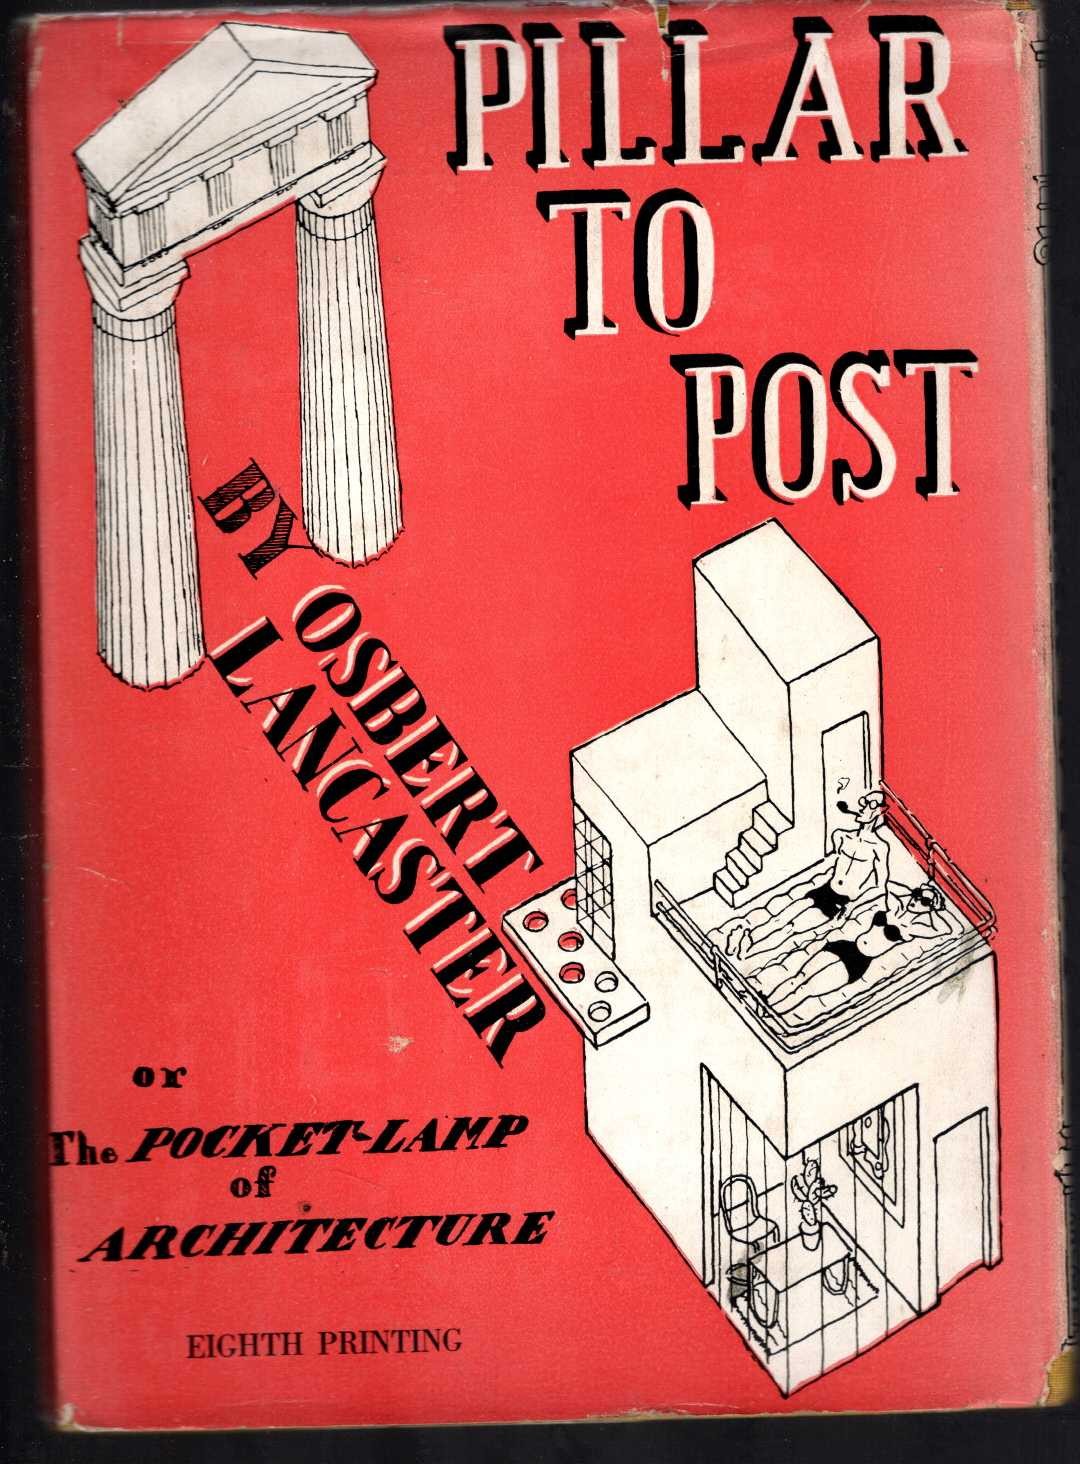 PILLAR TO POST magnified rear book cover image